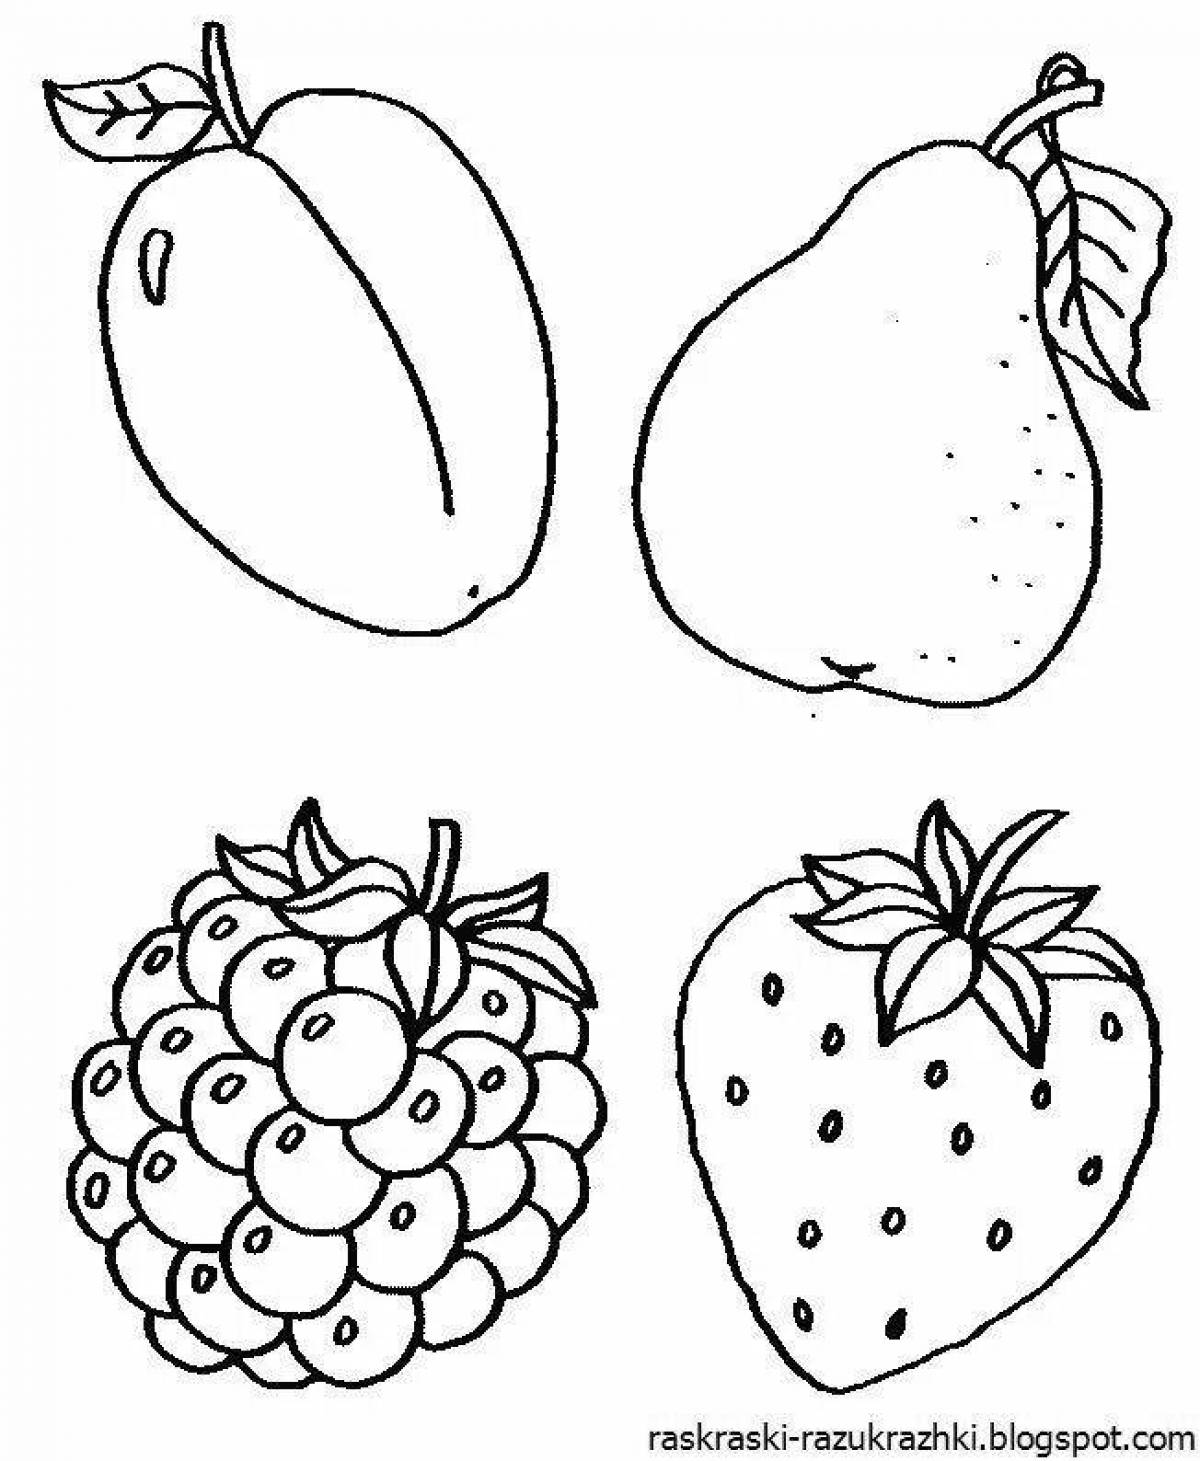 Playful fruit coloring page for kids